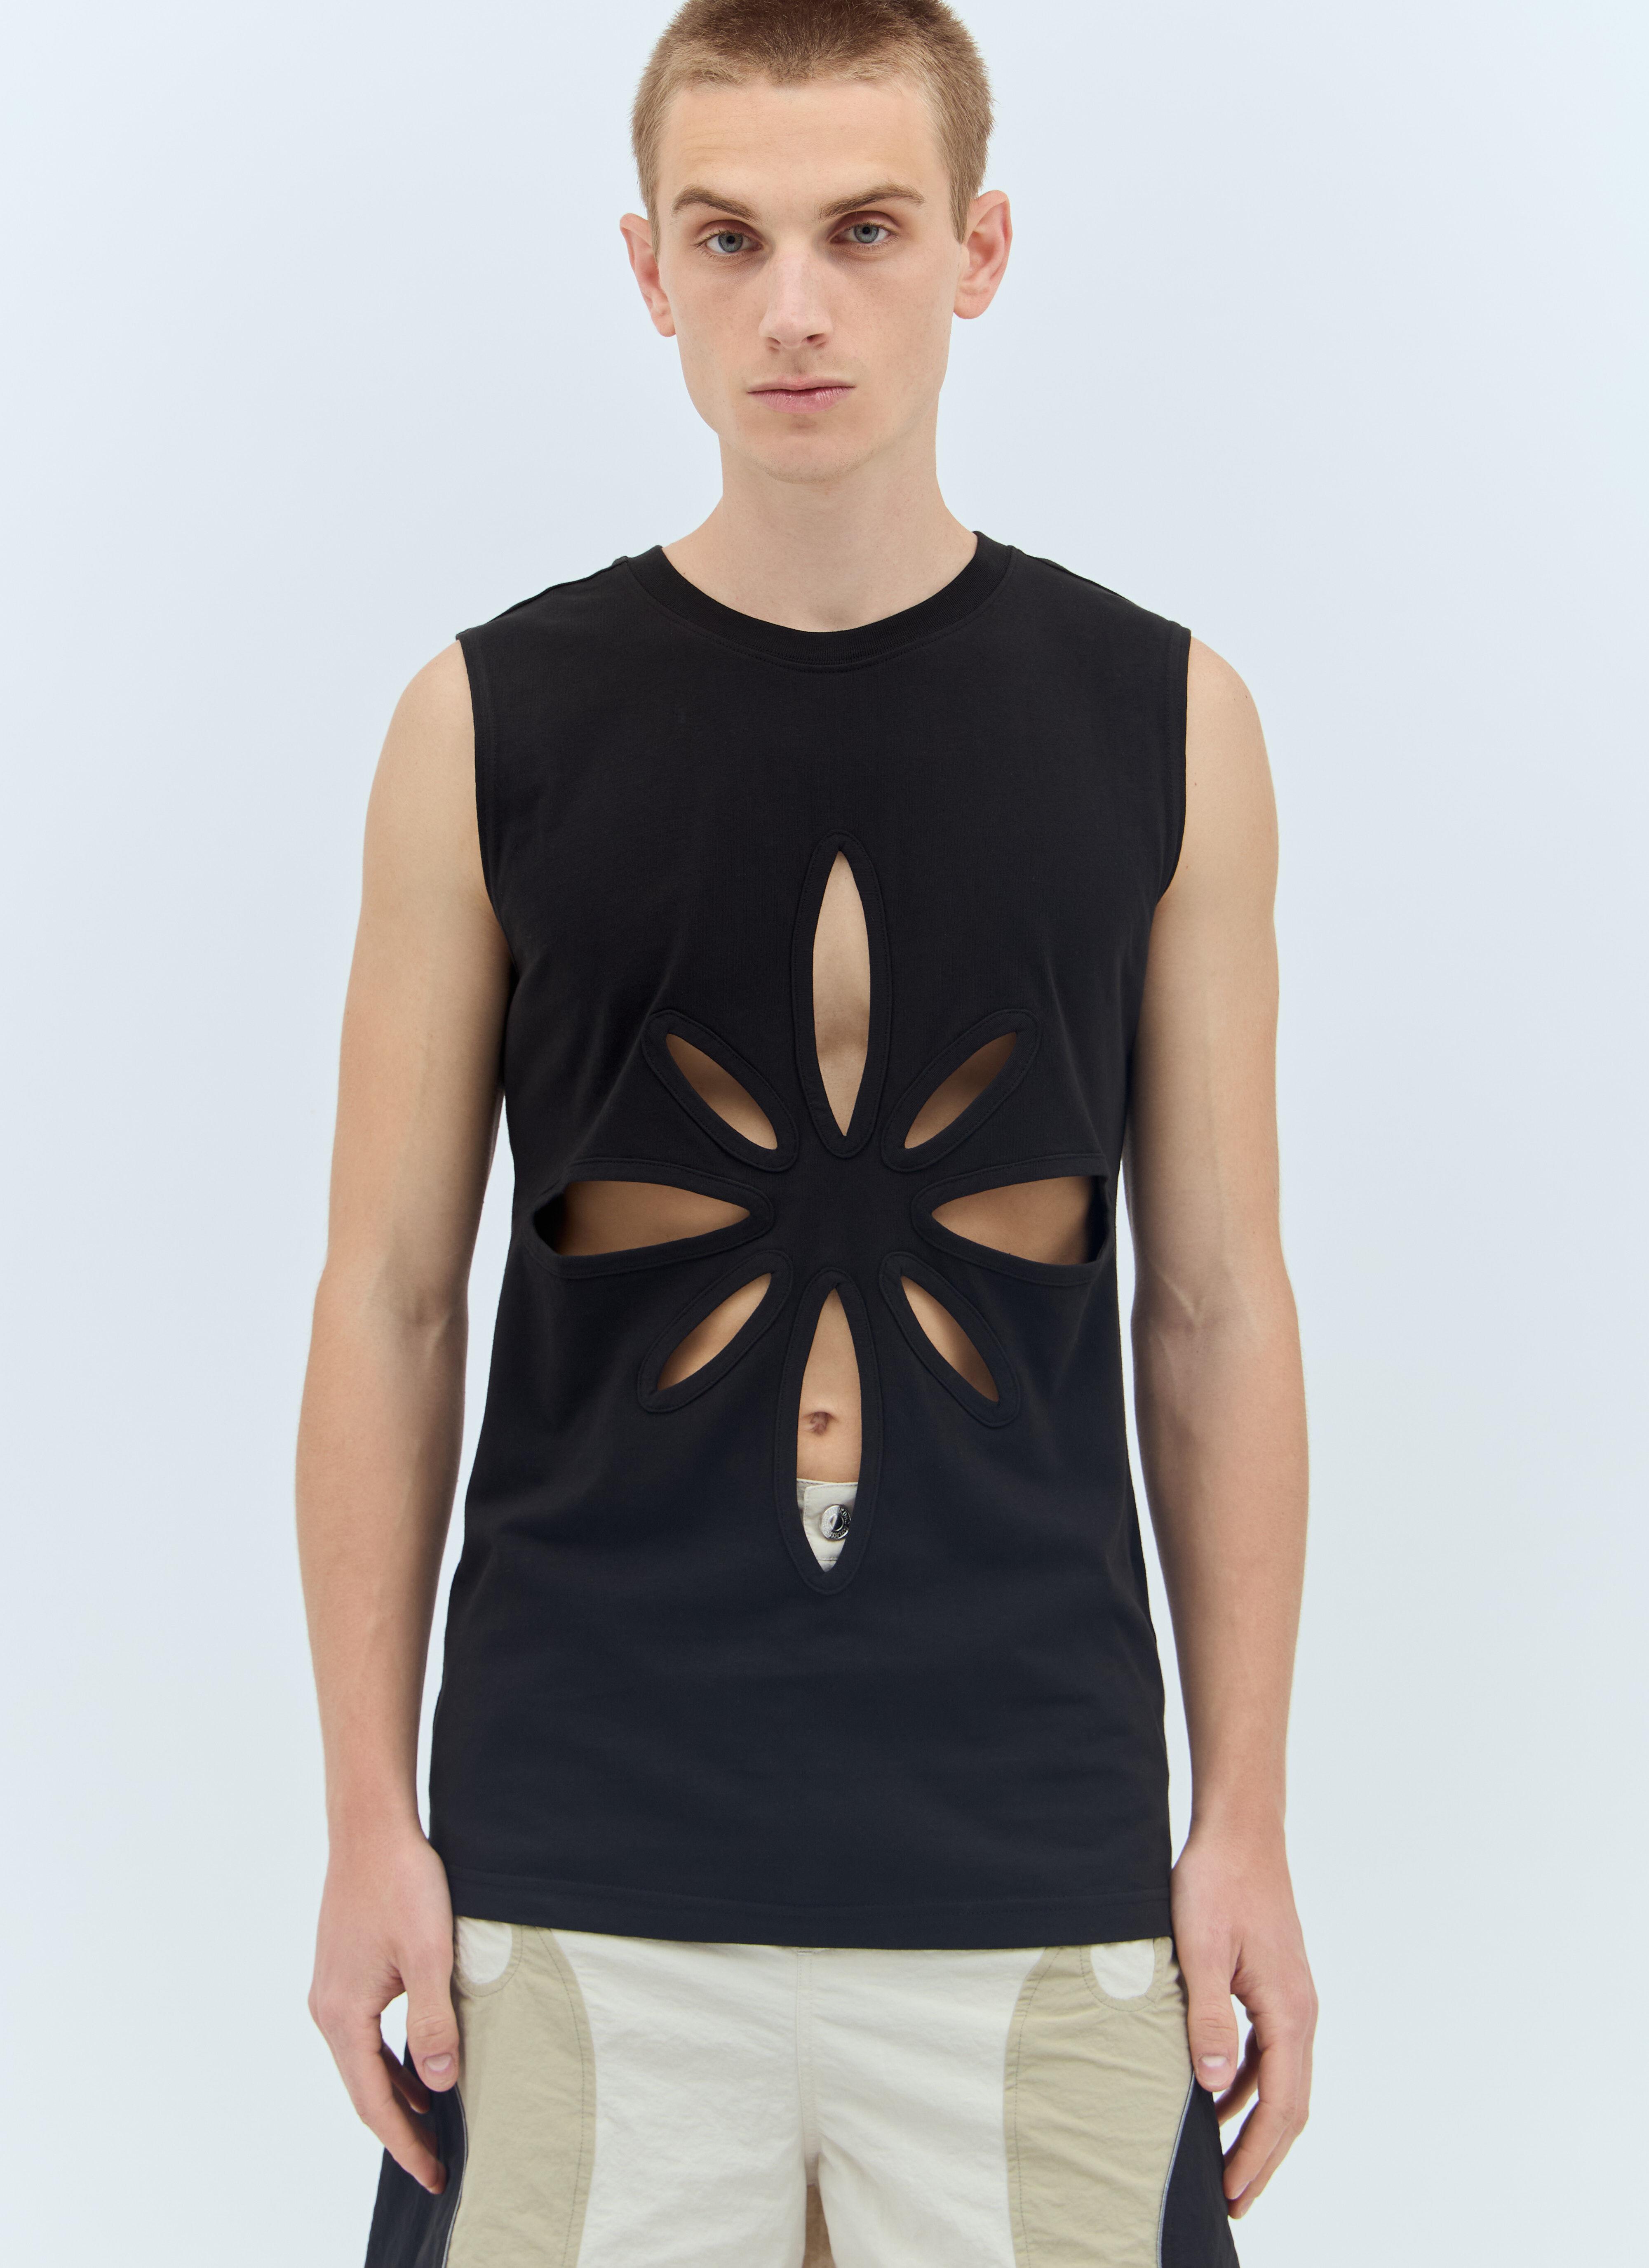 Rick Owens x Champion Origami Cut-Out Sleeveless Top ブラック roc0157002